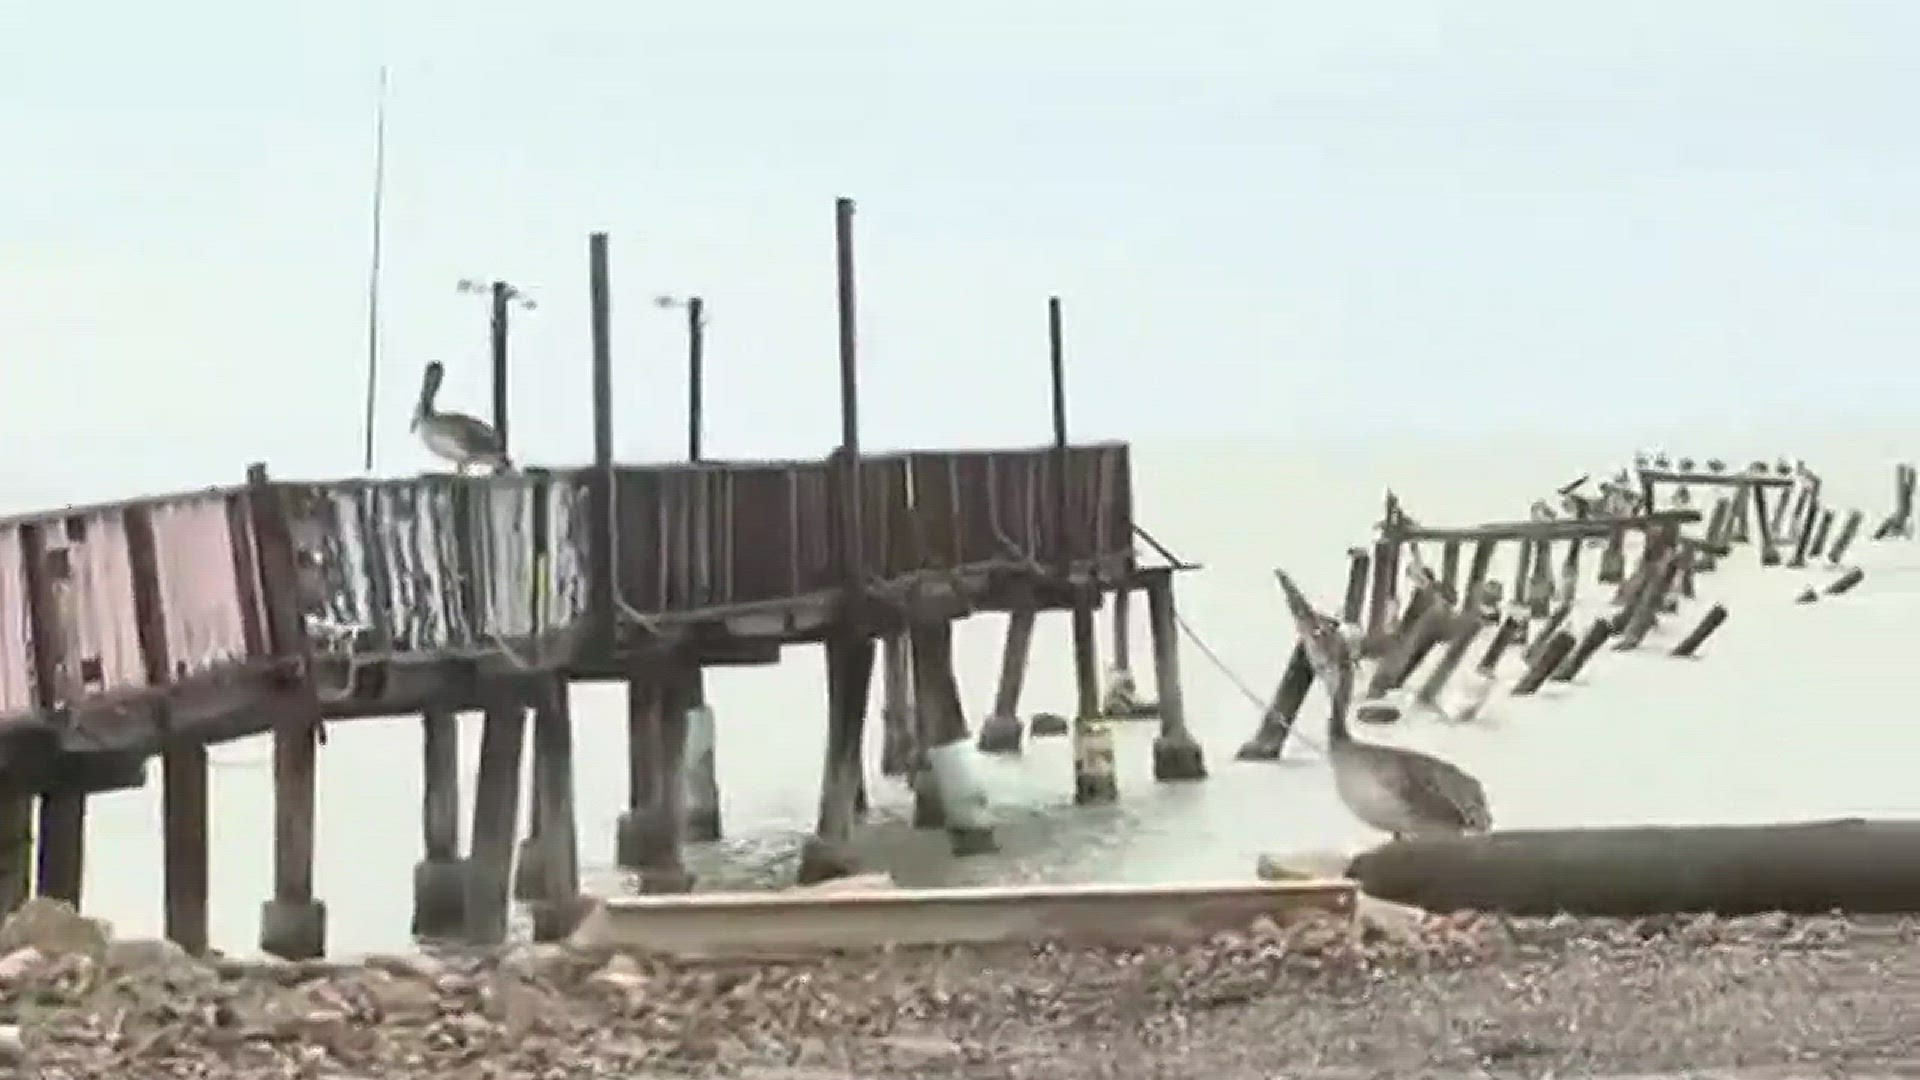 Heather Gustafson goes to Oso Pier, which has been mostly destroyed. The Island University nearby was not impacted.